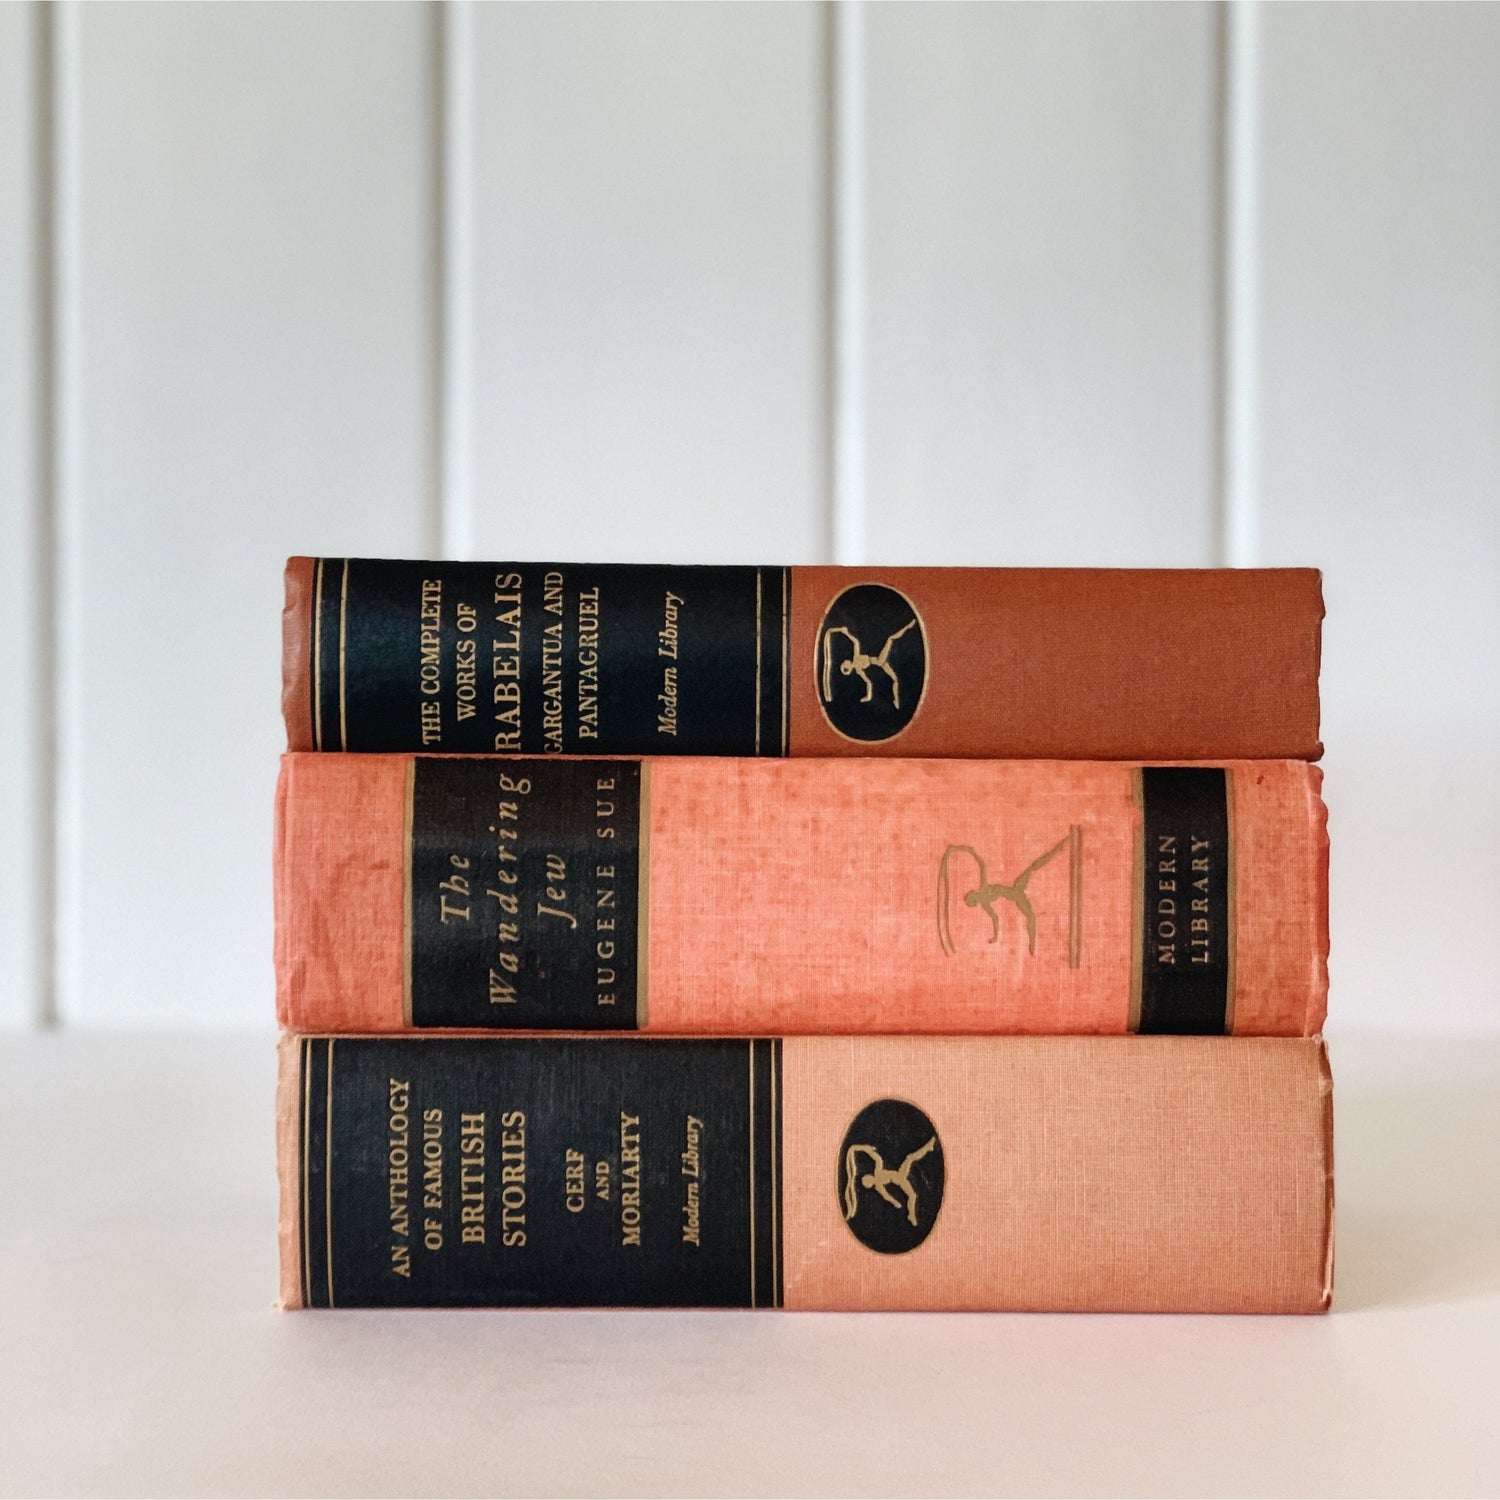 Rust Red and Black Decorative Books, Modern Library Giant Books, Shabby Distressed Bookshelf Decor, Aesthetic Books for Home Office Decor